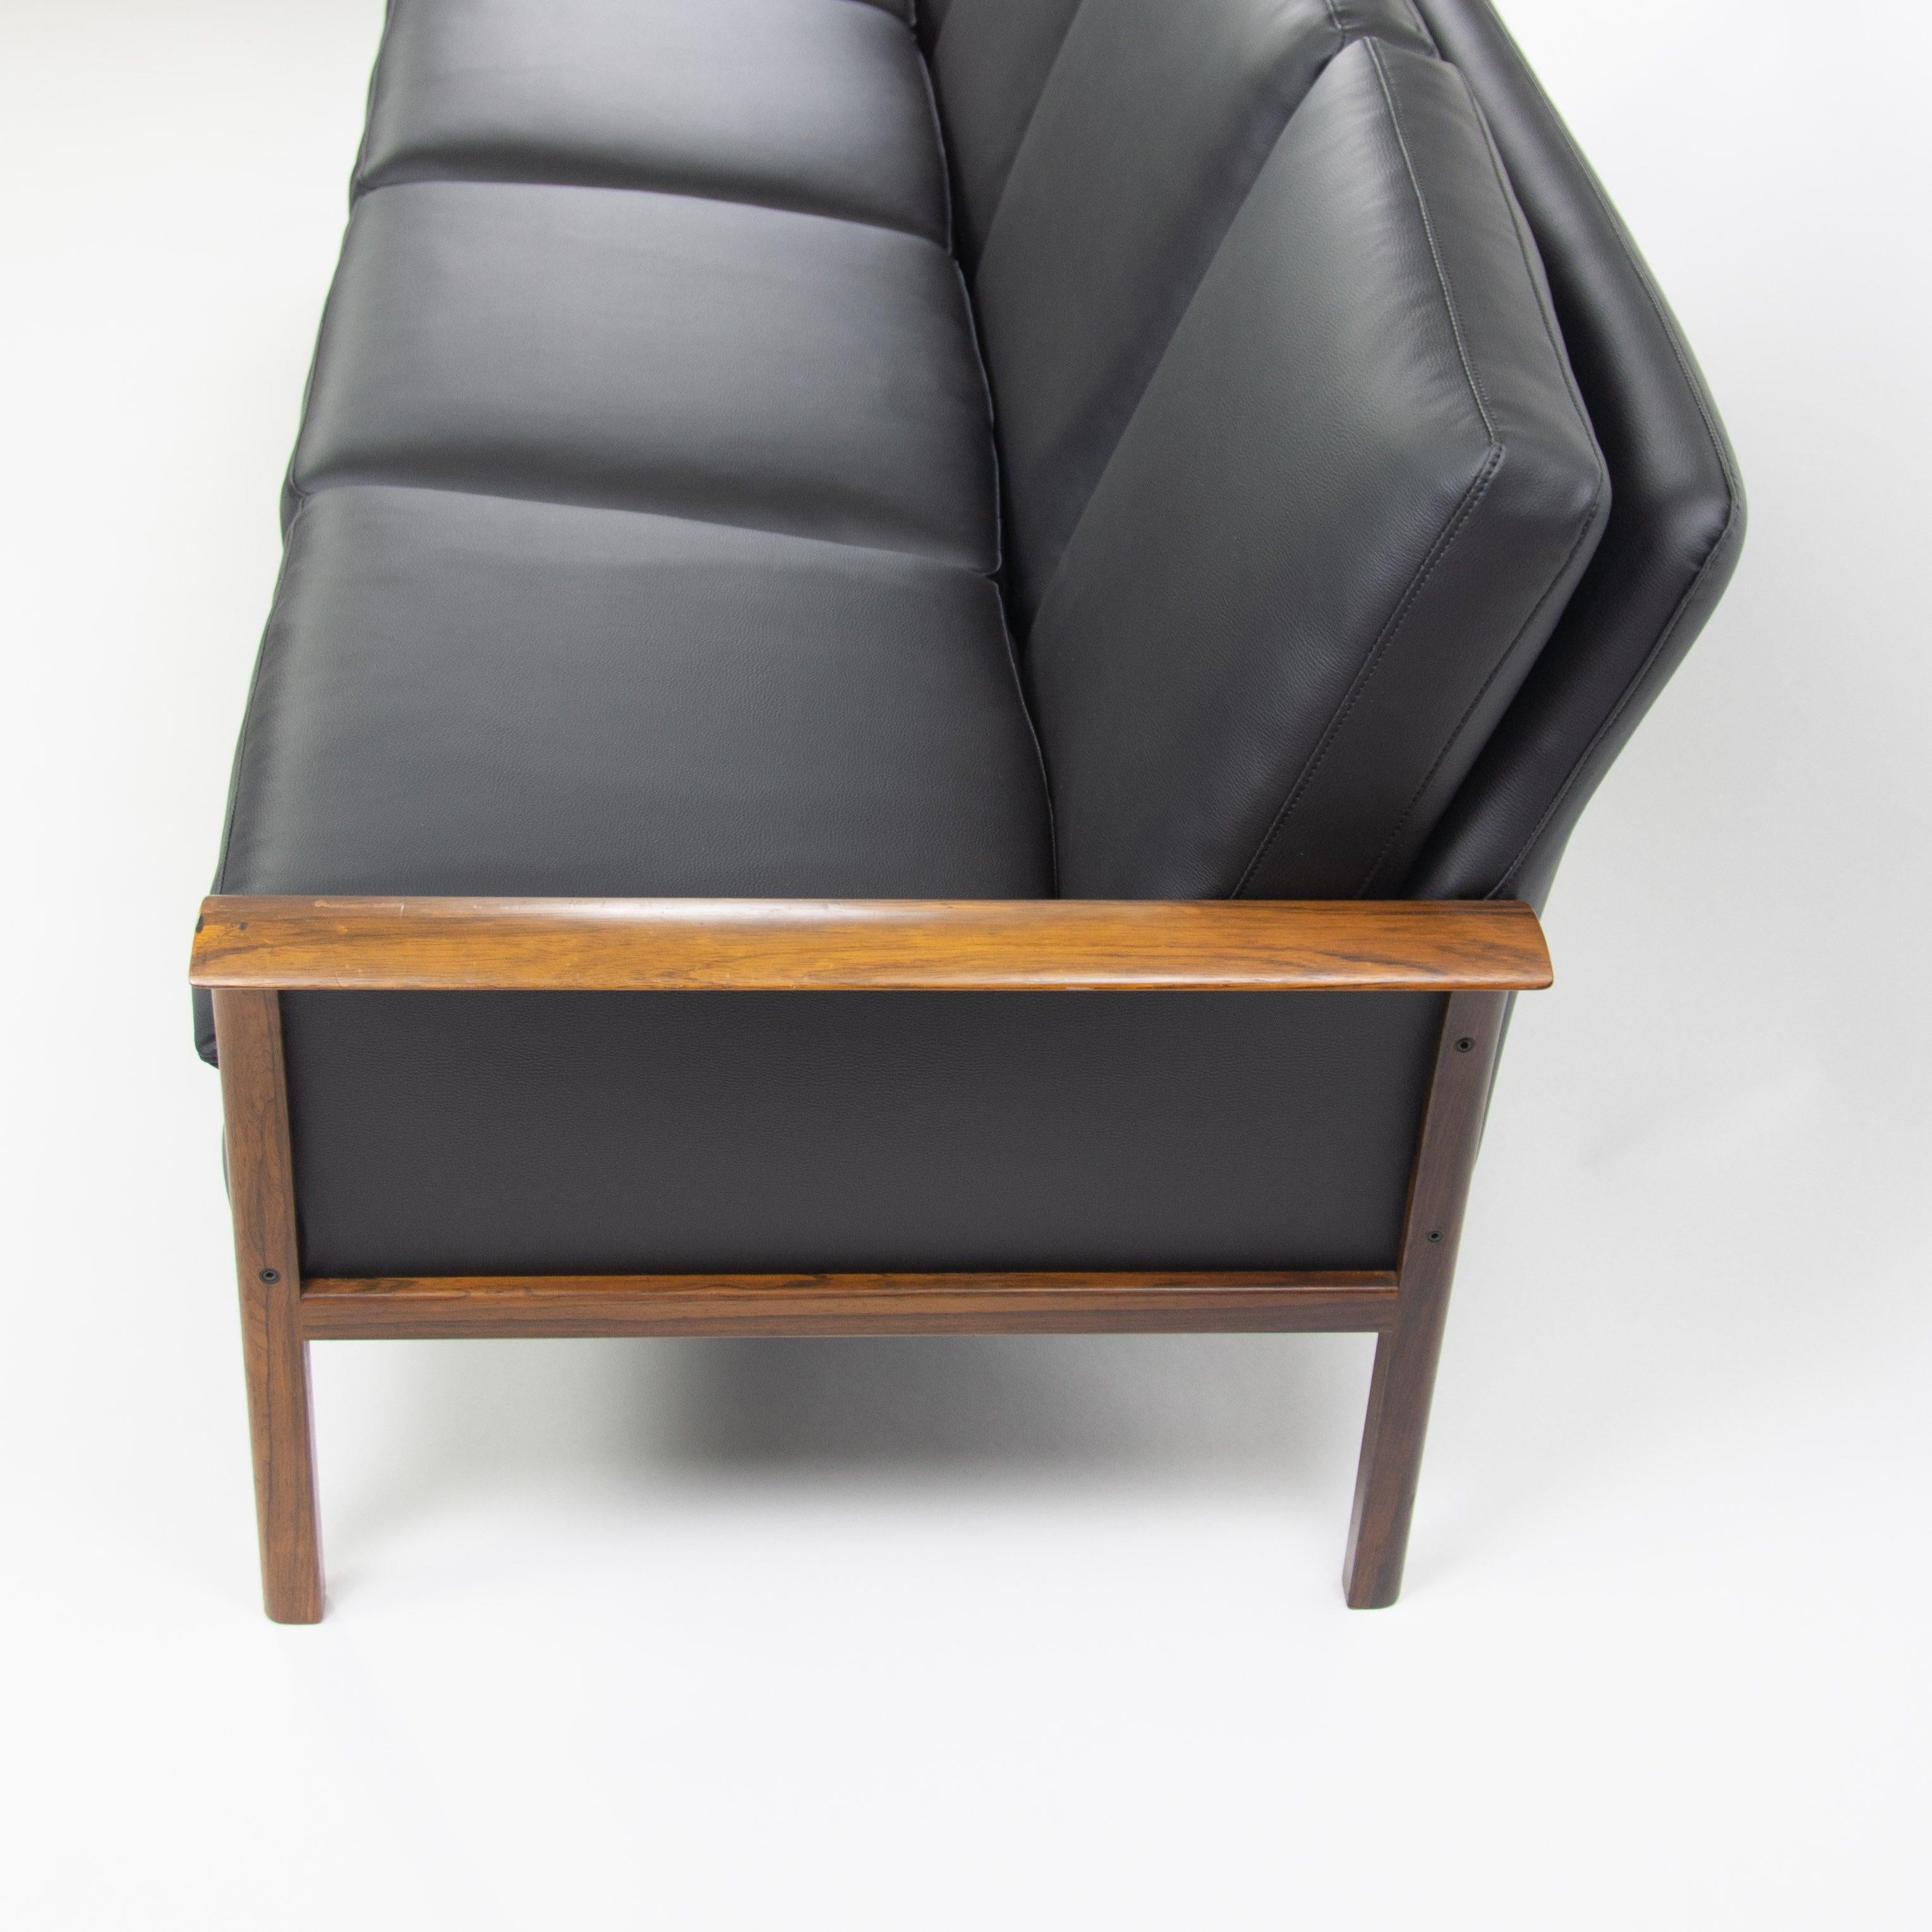 Modern 1960's Knut Saeter Rosewood Sofa for Vatne Mobler Norway New Black Upholstery For Sale